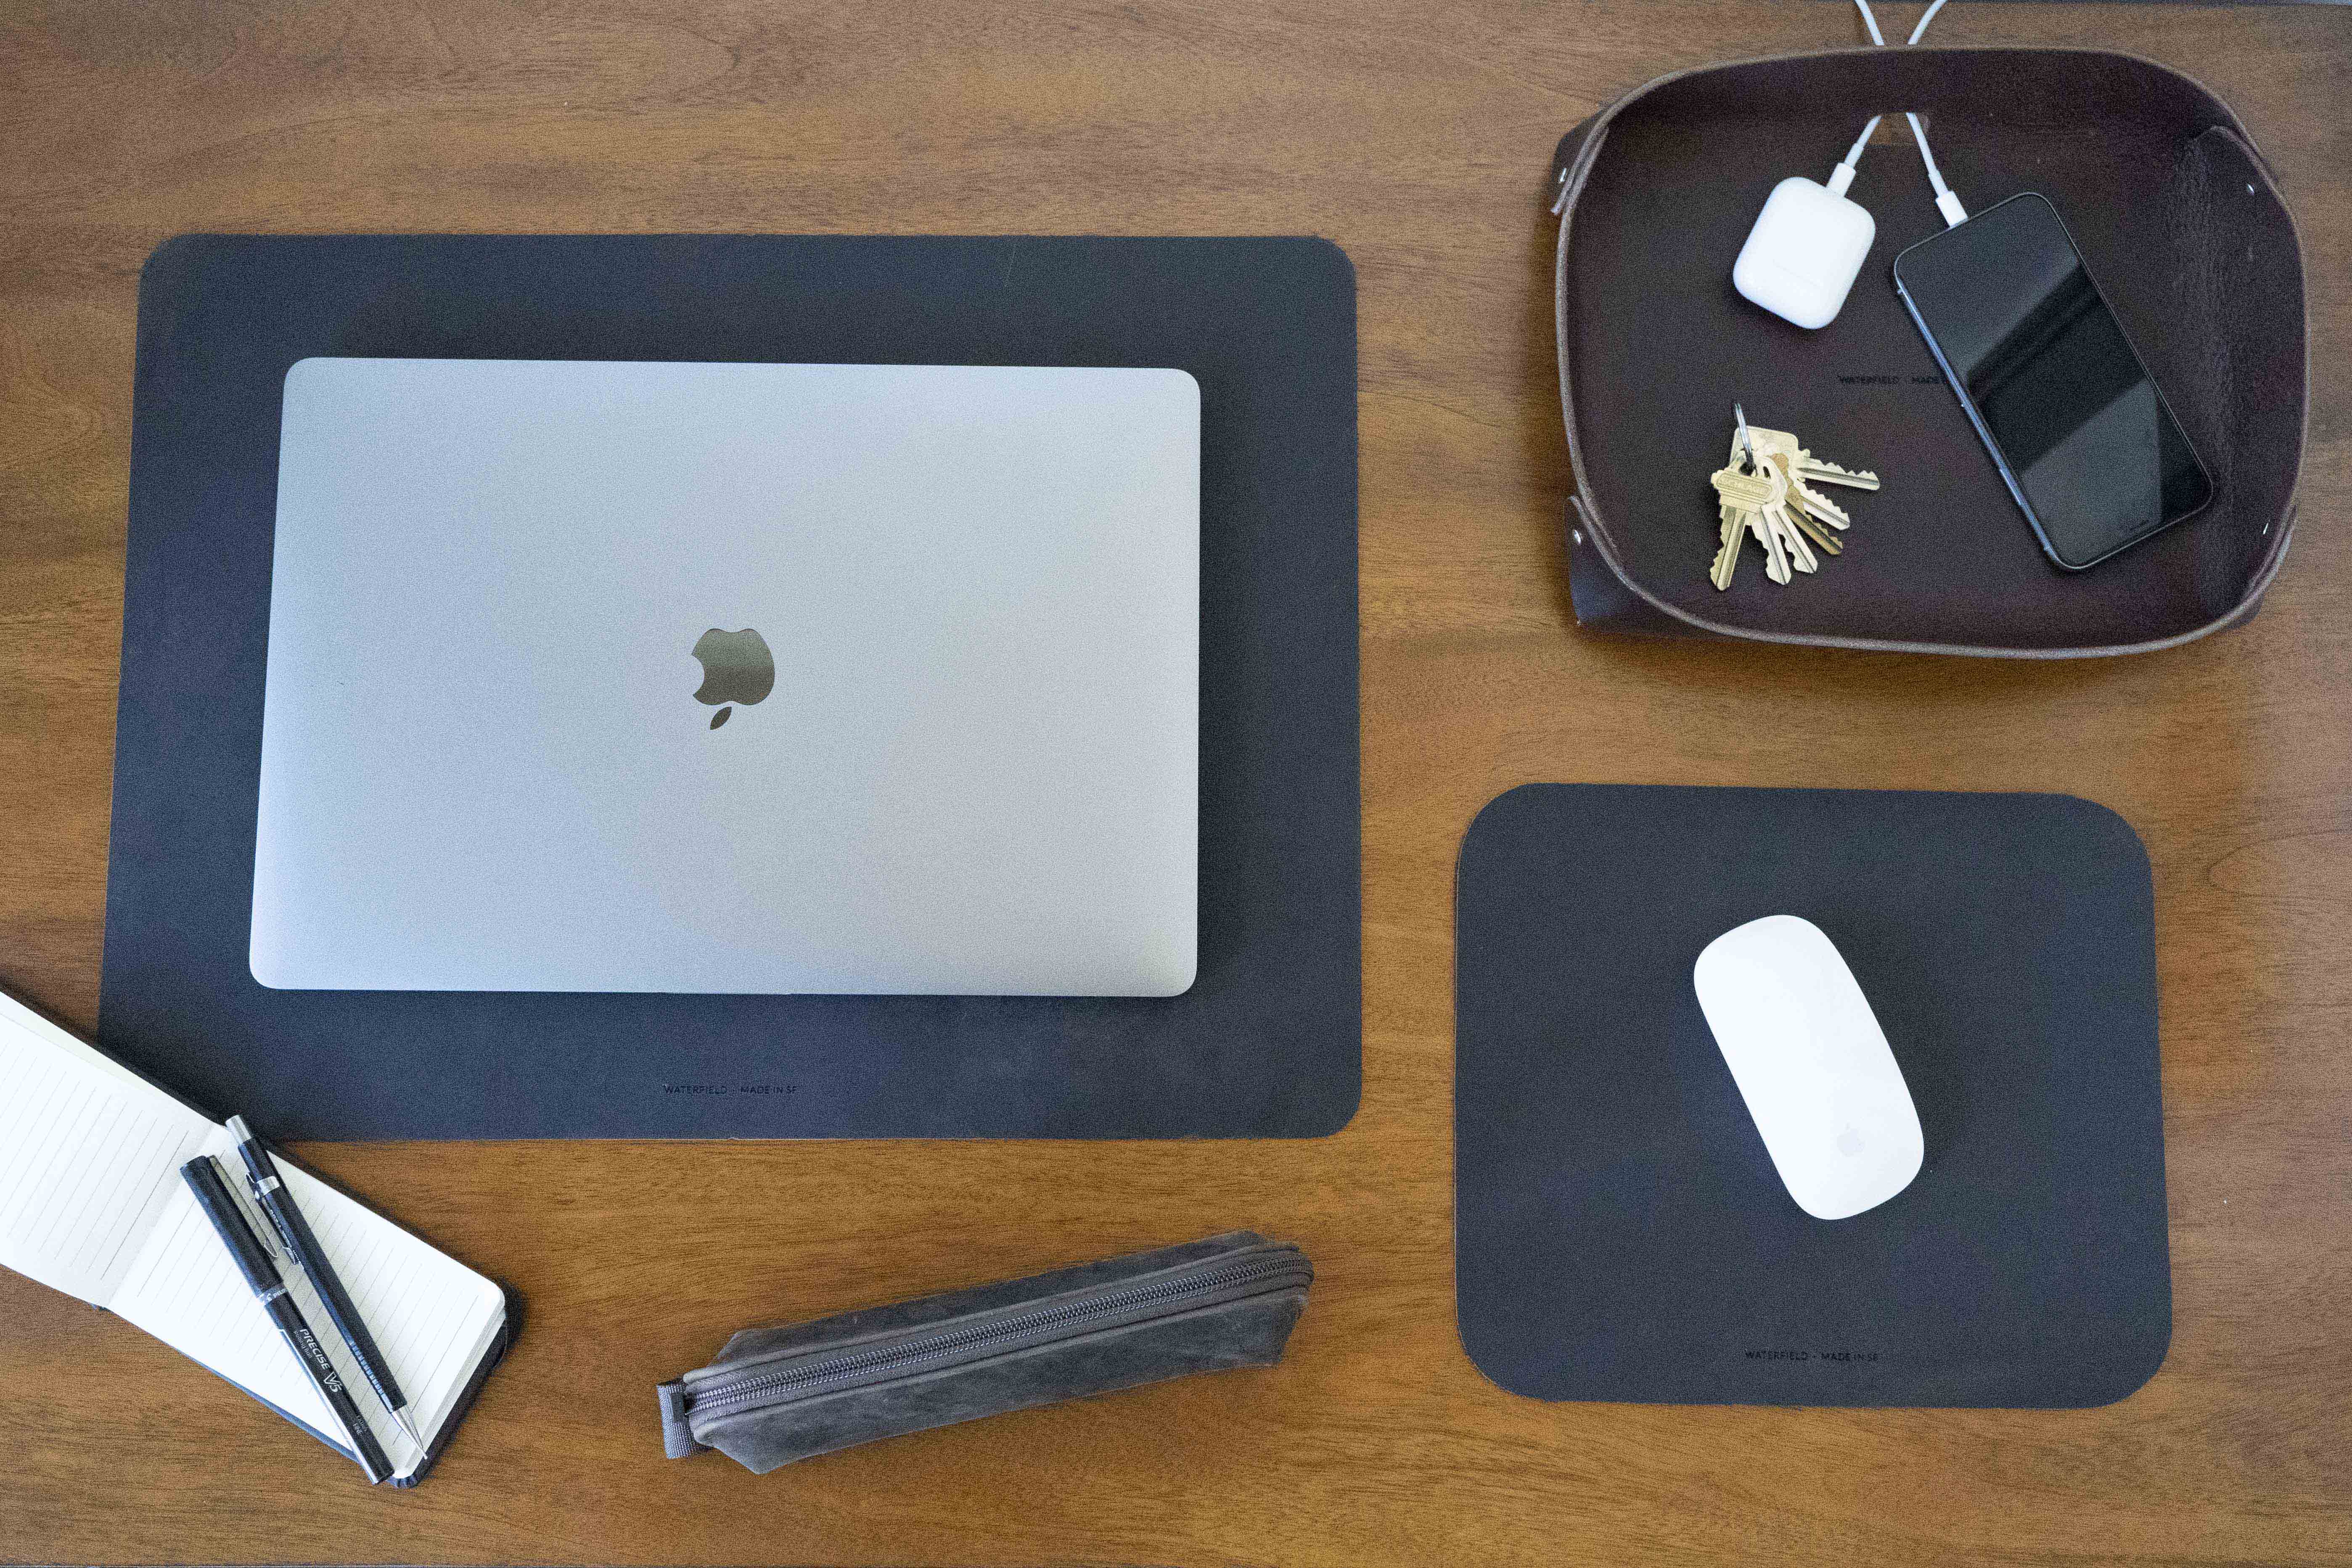 WaterField Unveils Exquisite Leather Desk Accessories Collection in Time for Holiday Gifting